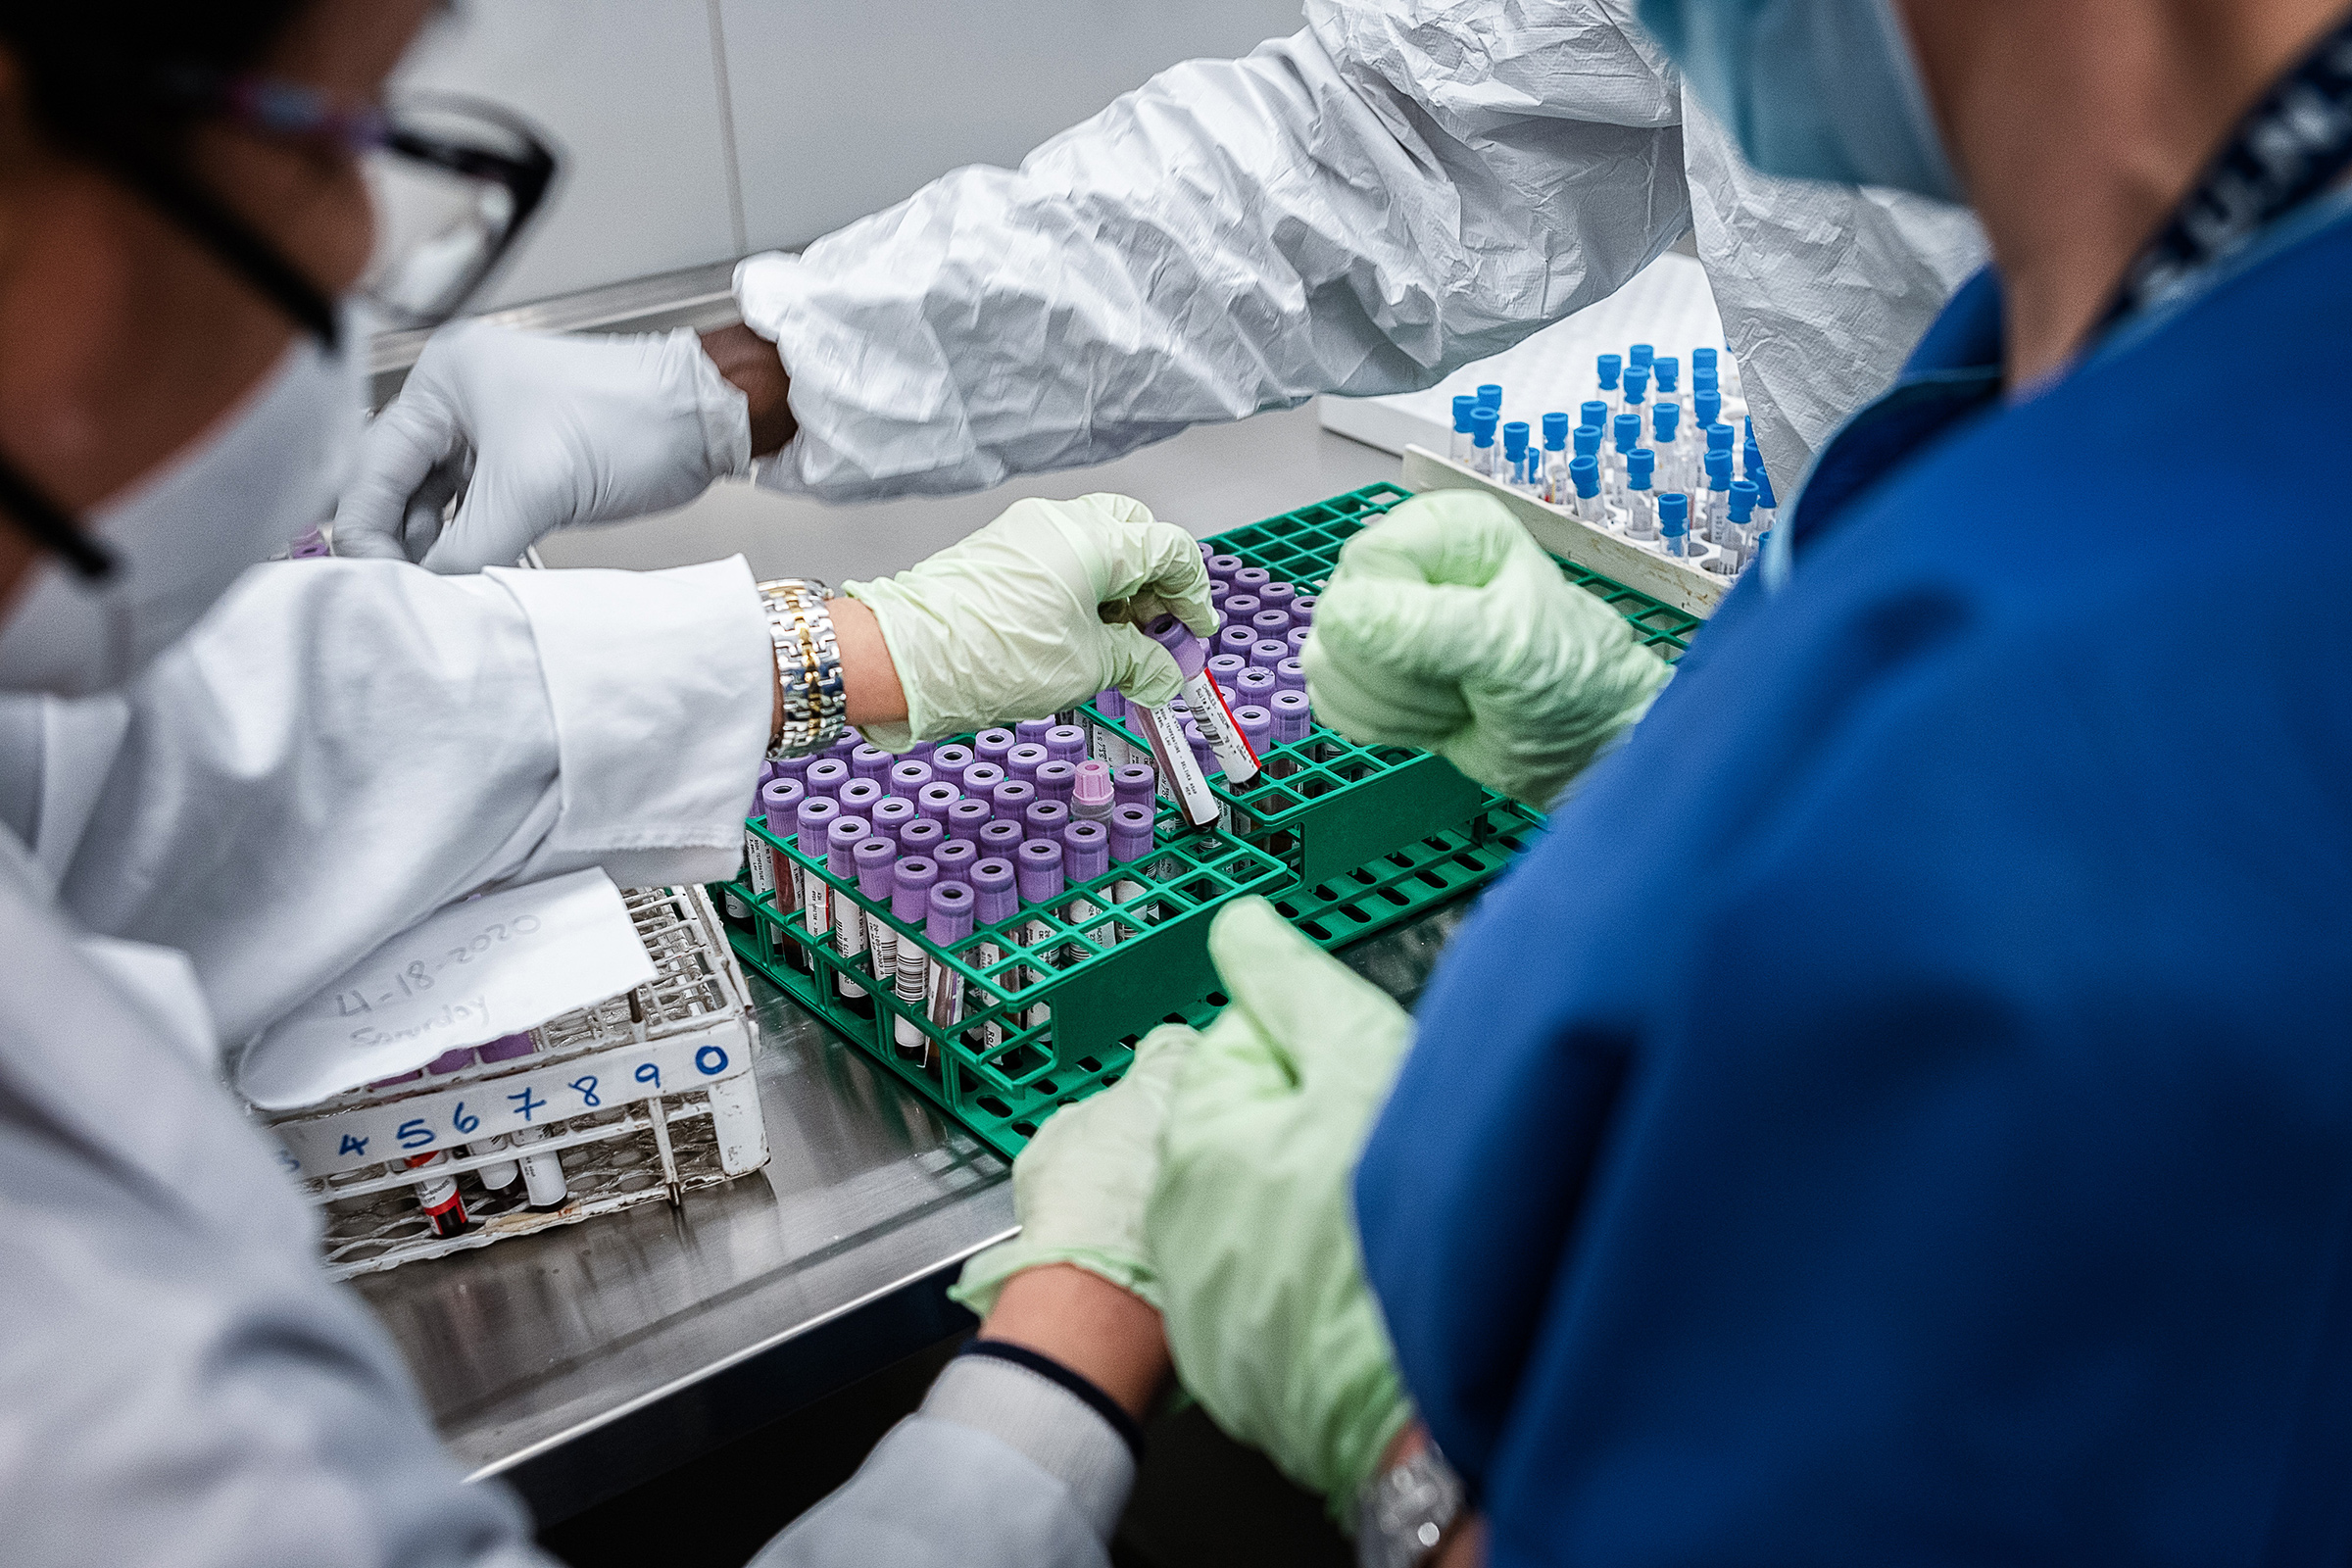 Researchers at SUNY Downstate Health Sciences University prepare samples from COVID-19 patients (Misha Friedman—Getty Images)